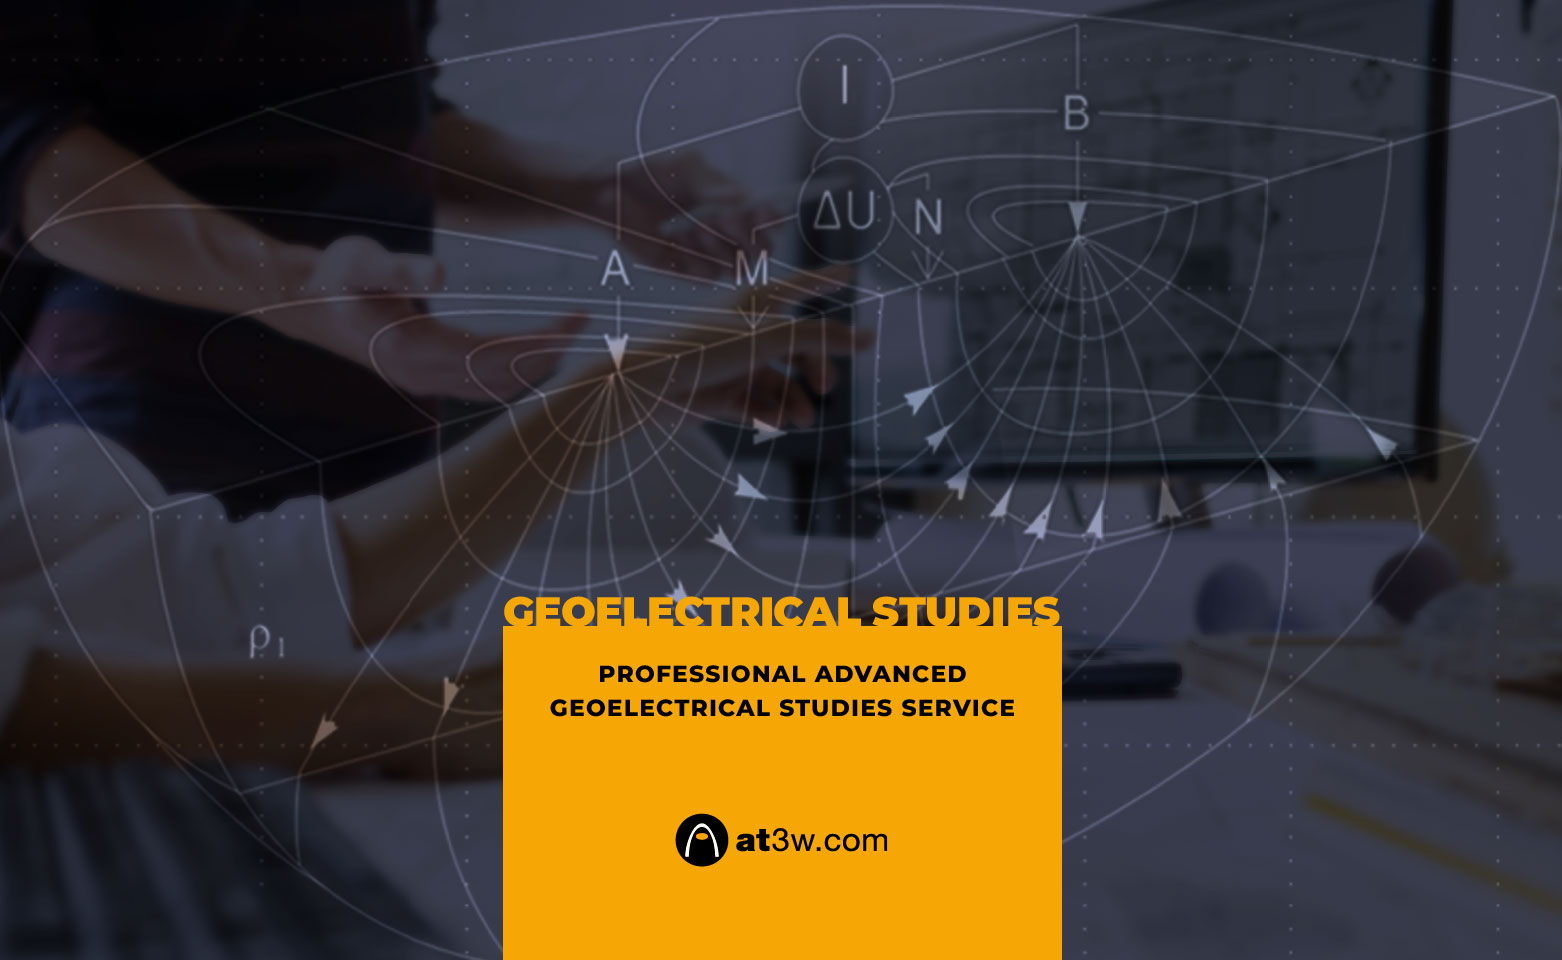 Aplicaciones Tecnológicas presents its professional service of advanced geoelectrical studies, especially aimed at engineering and architectural studies and with our method based on simplifying the measurement process, which provides more reliable results thanks to the application of smart technologies and the processing of results by specialists, which makes it highly competitive.